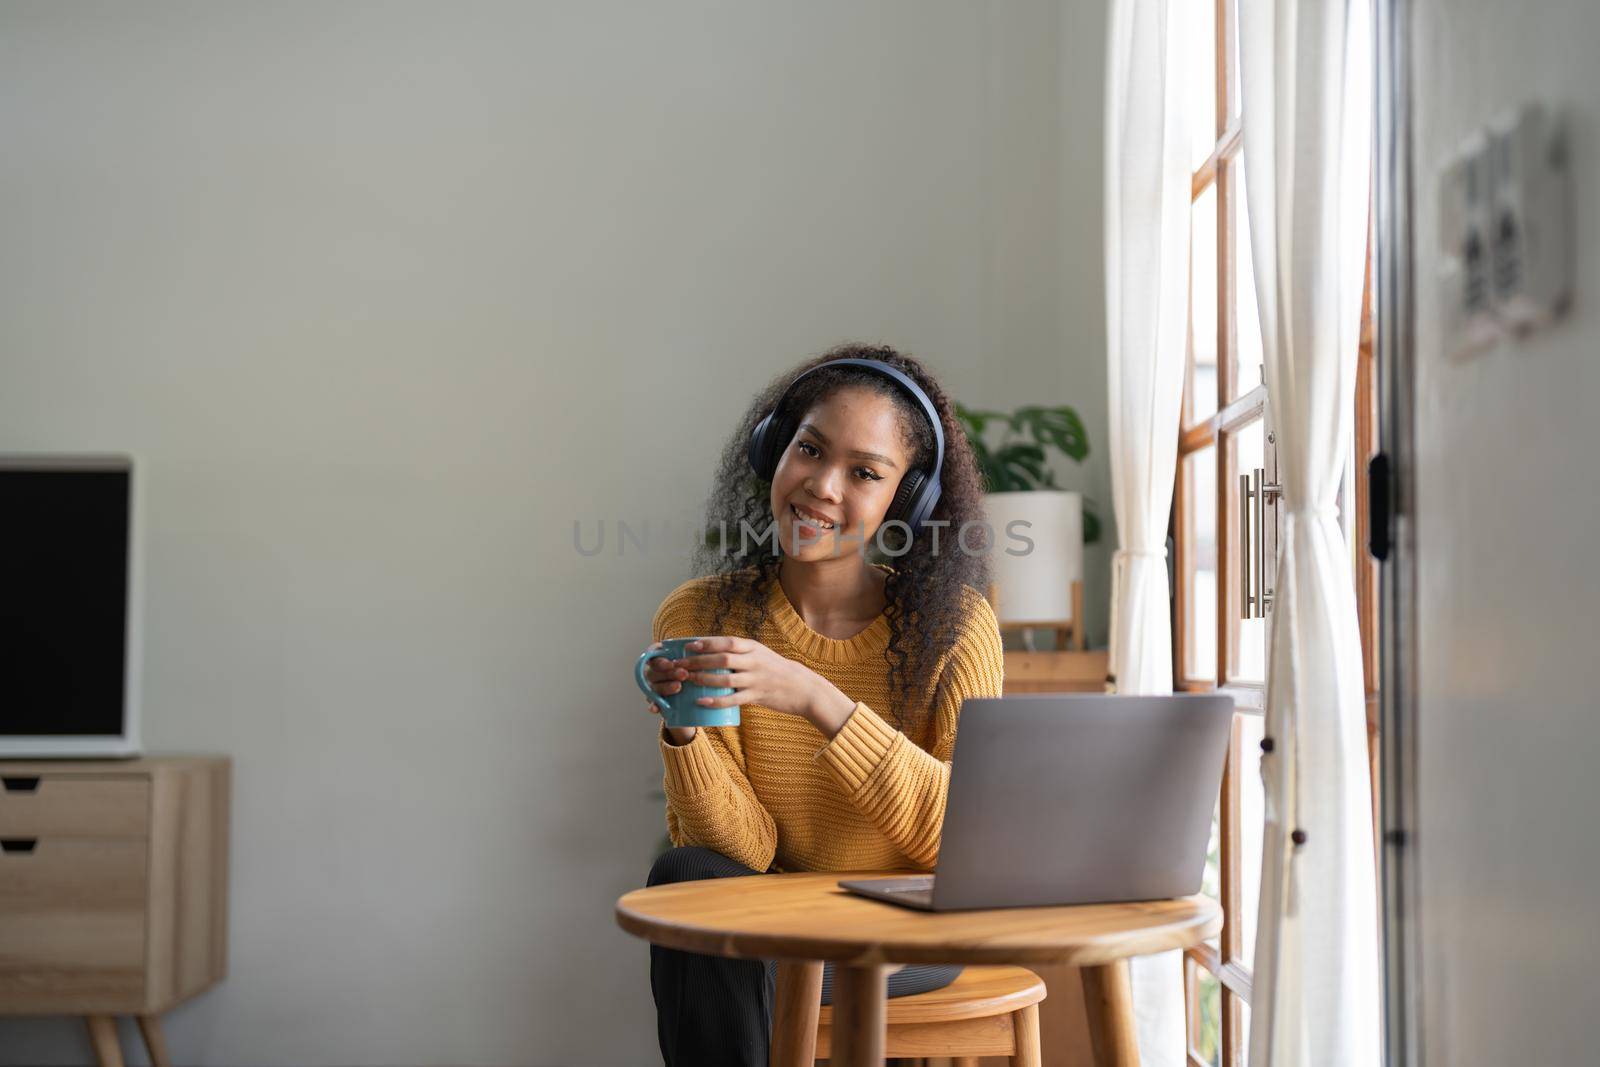 Portrait of African American woman talking on video conference call using laptop and headphones taking notes on notepad. Brunette sits at table in home office